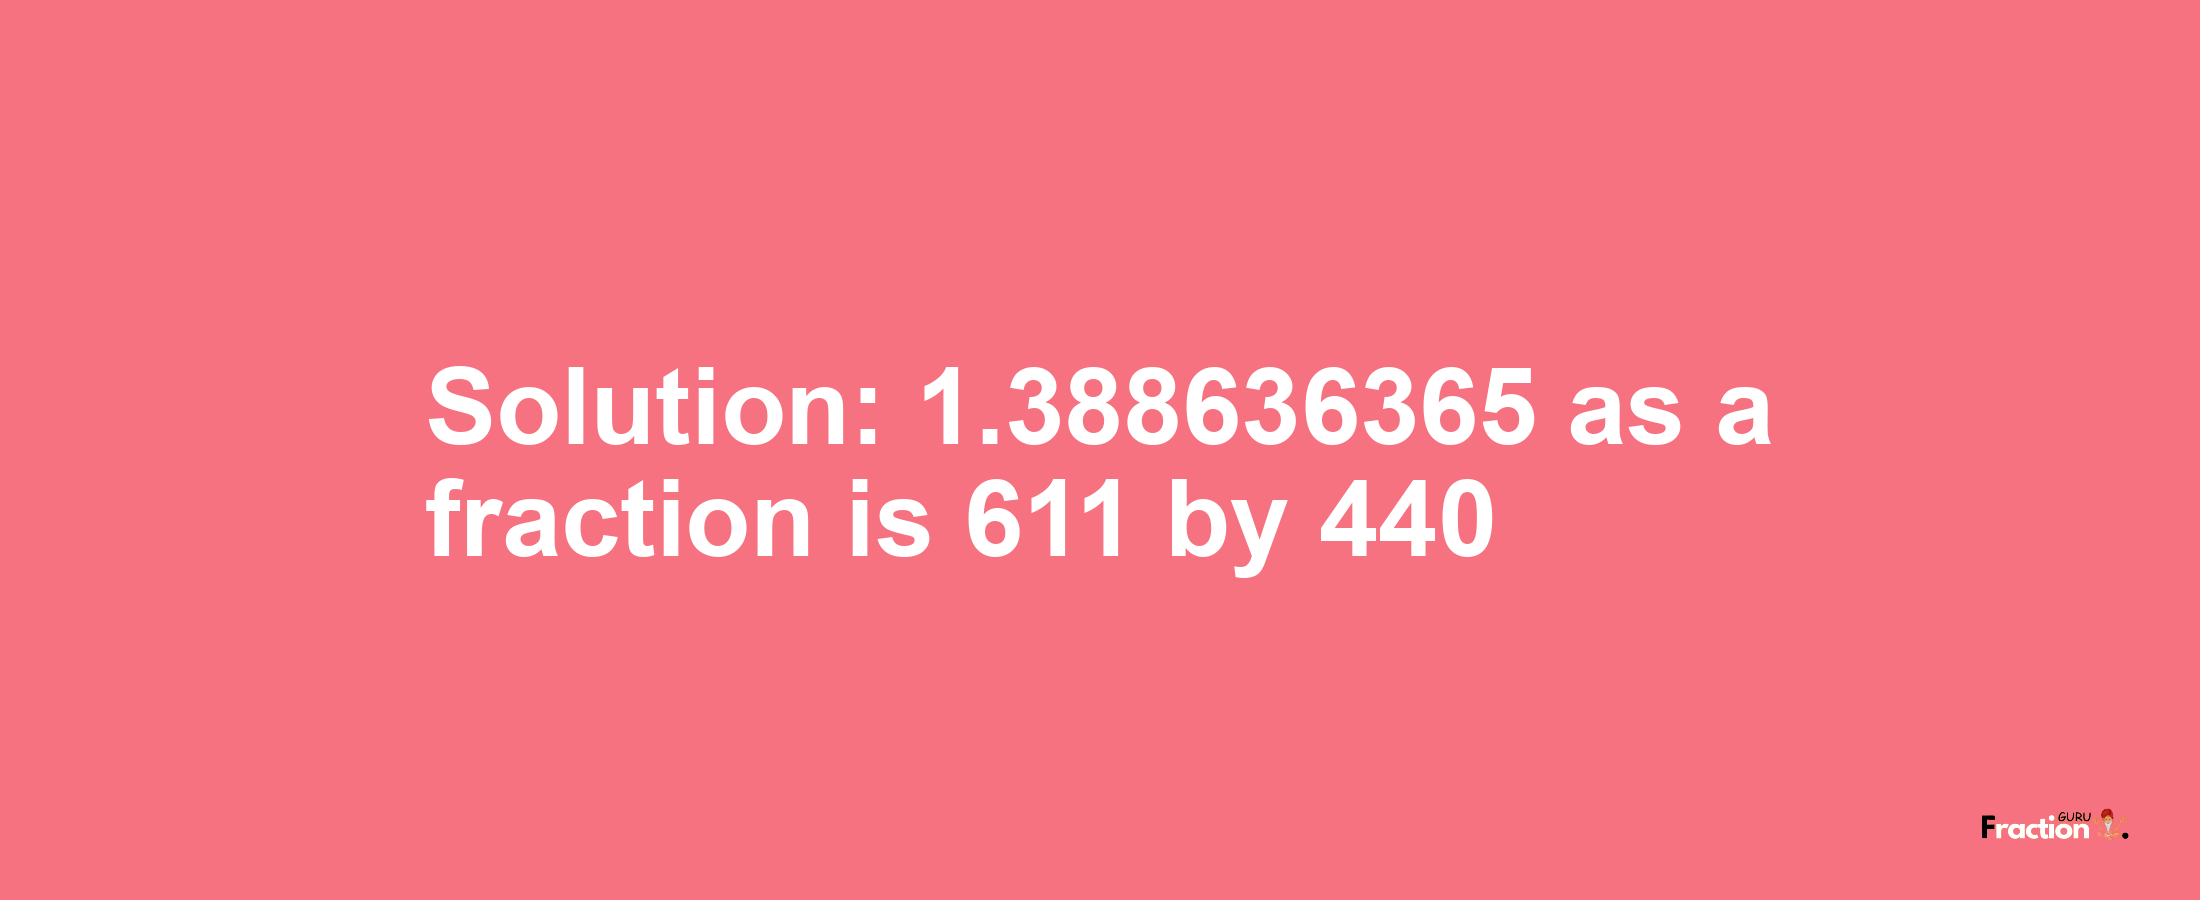 Solution:1.388636365 as a fraction is 611/440